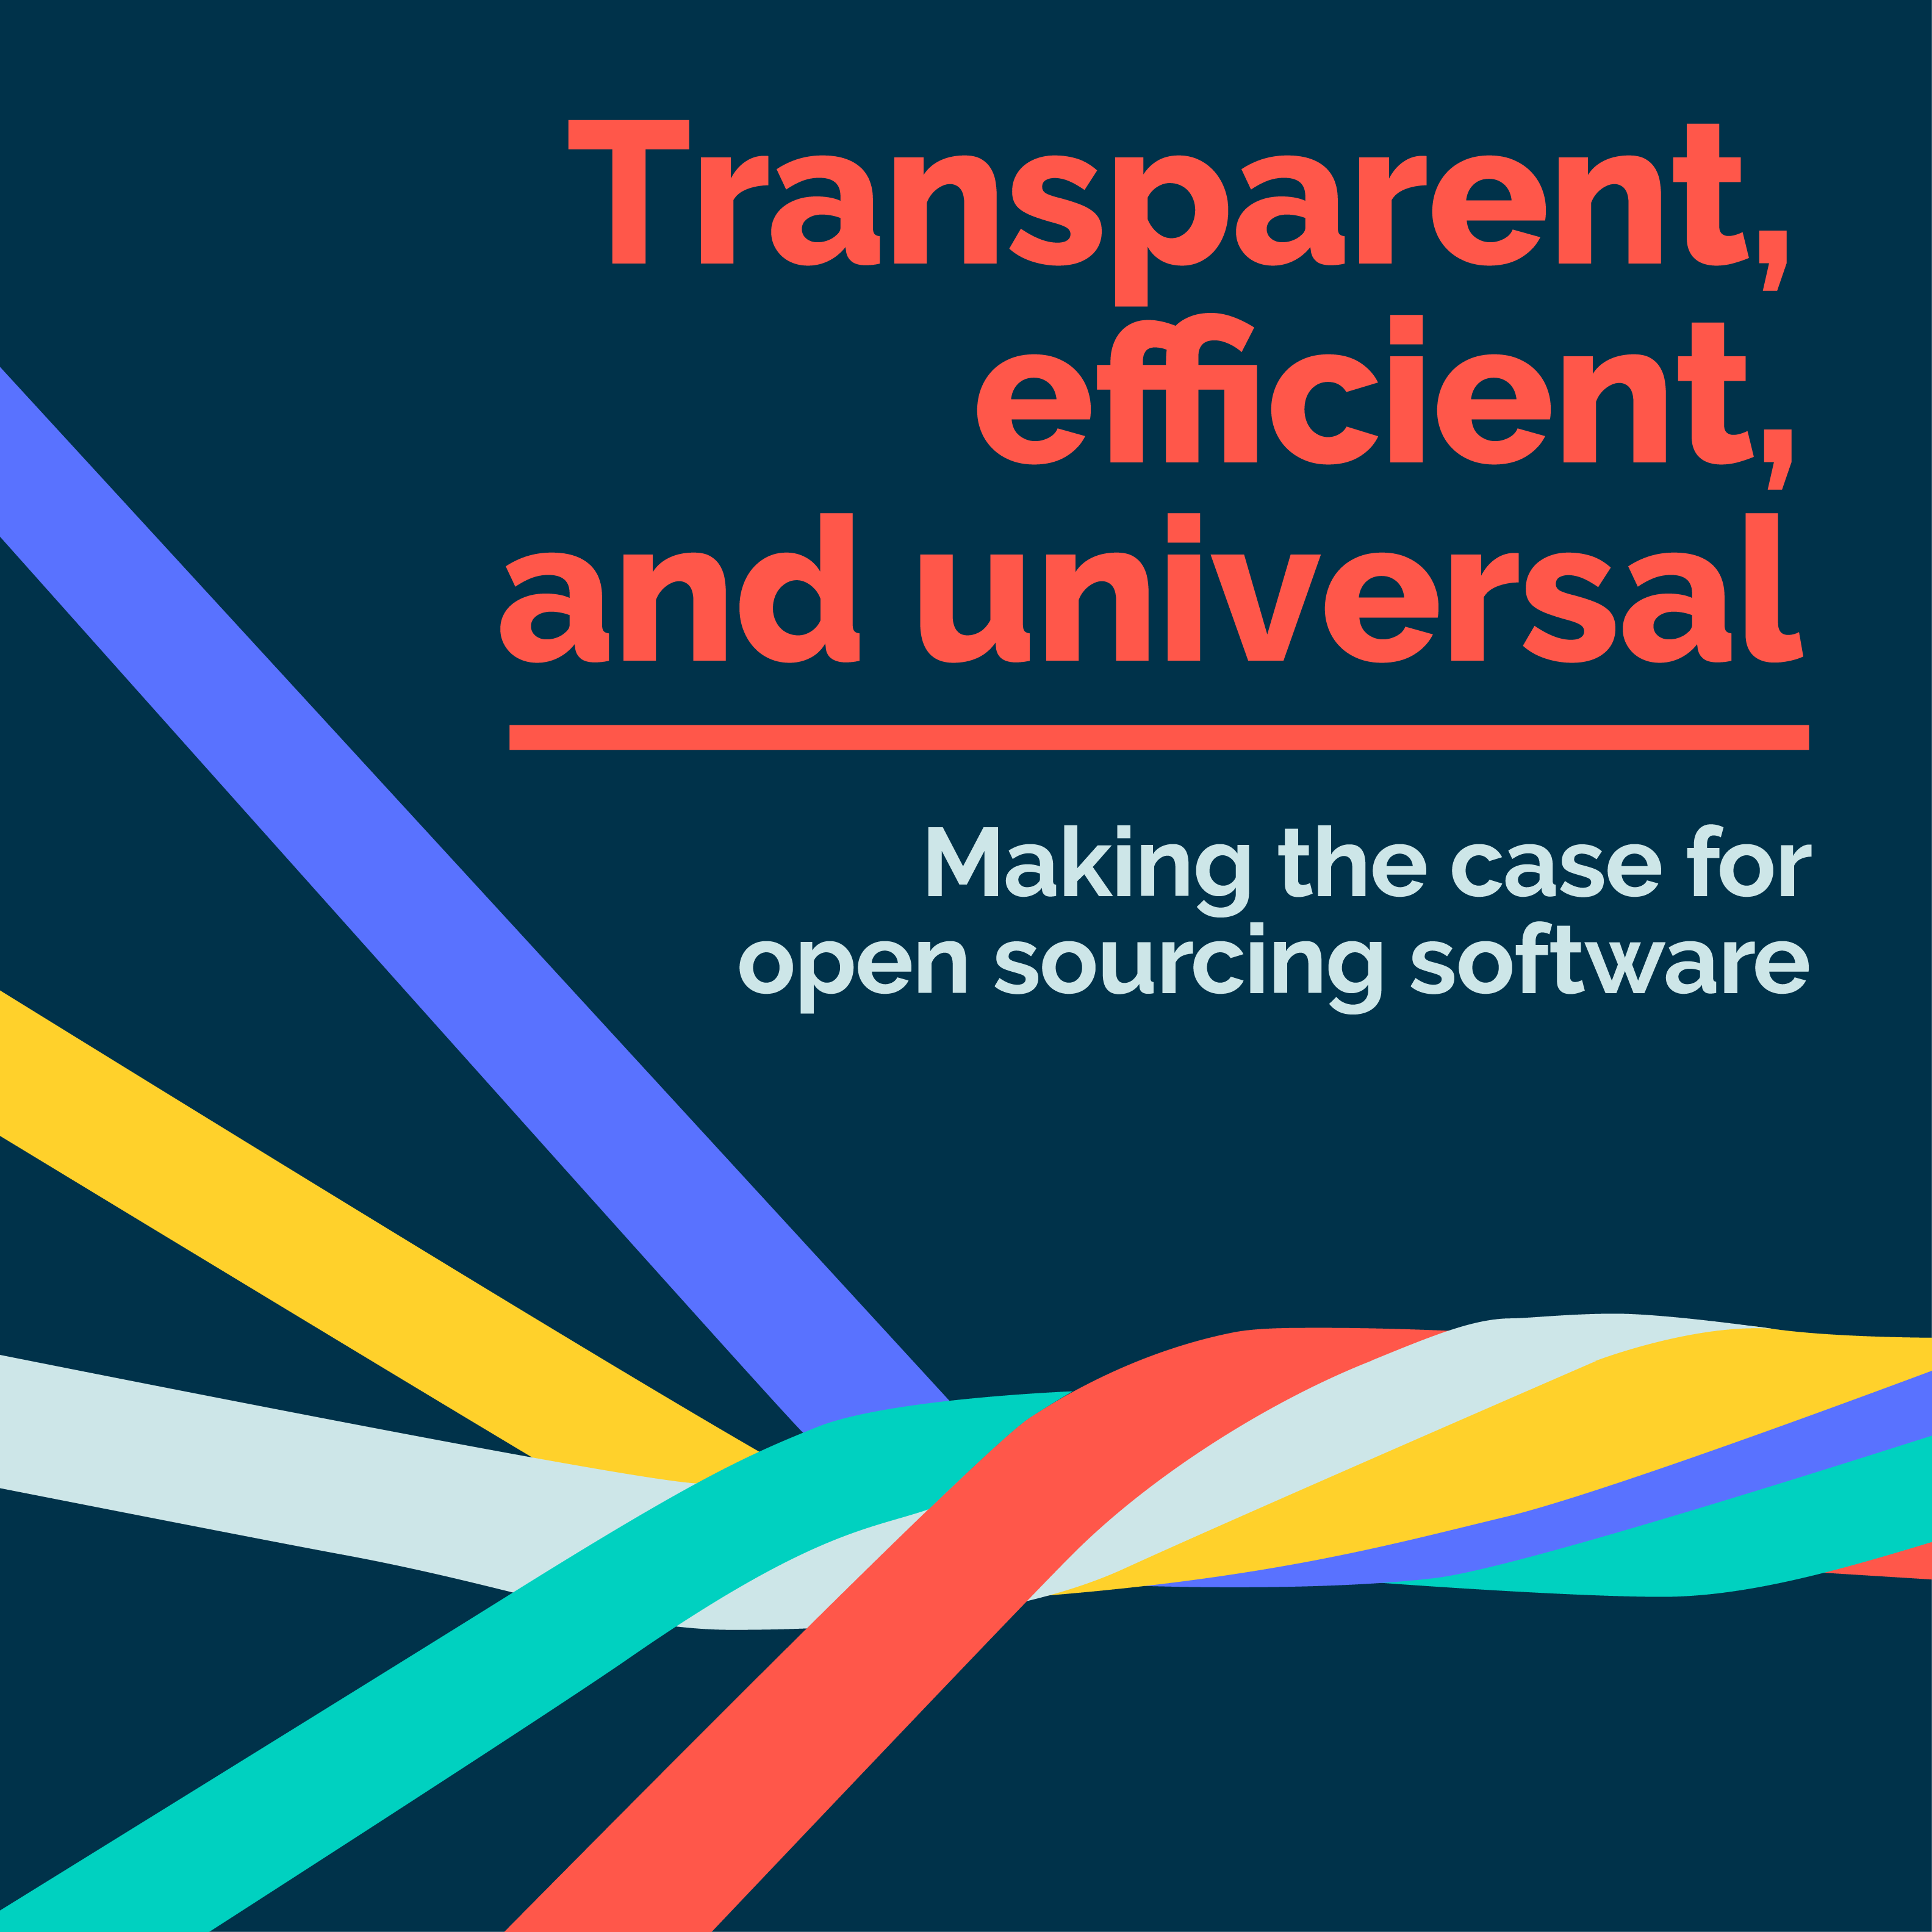 Transparent, efficient, and universal: making the case for open sourcing software